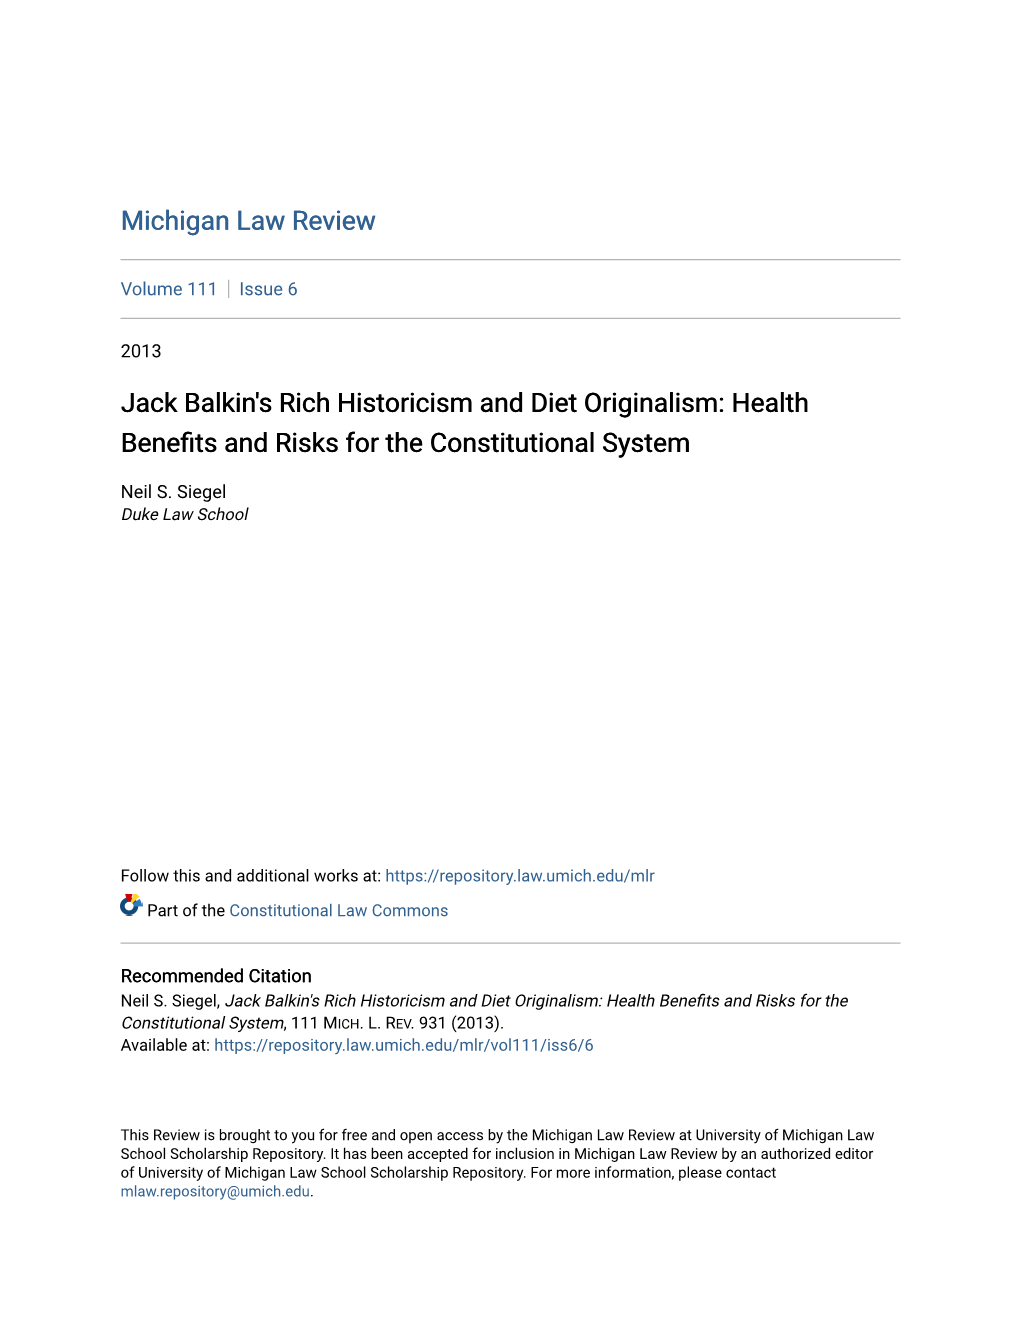 Jack Balkin's Rich Historicism and Diet Originalism: Health Benefits and Risks for the Constitutional System